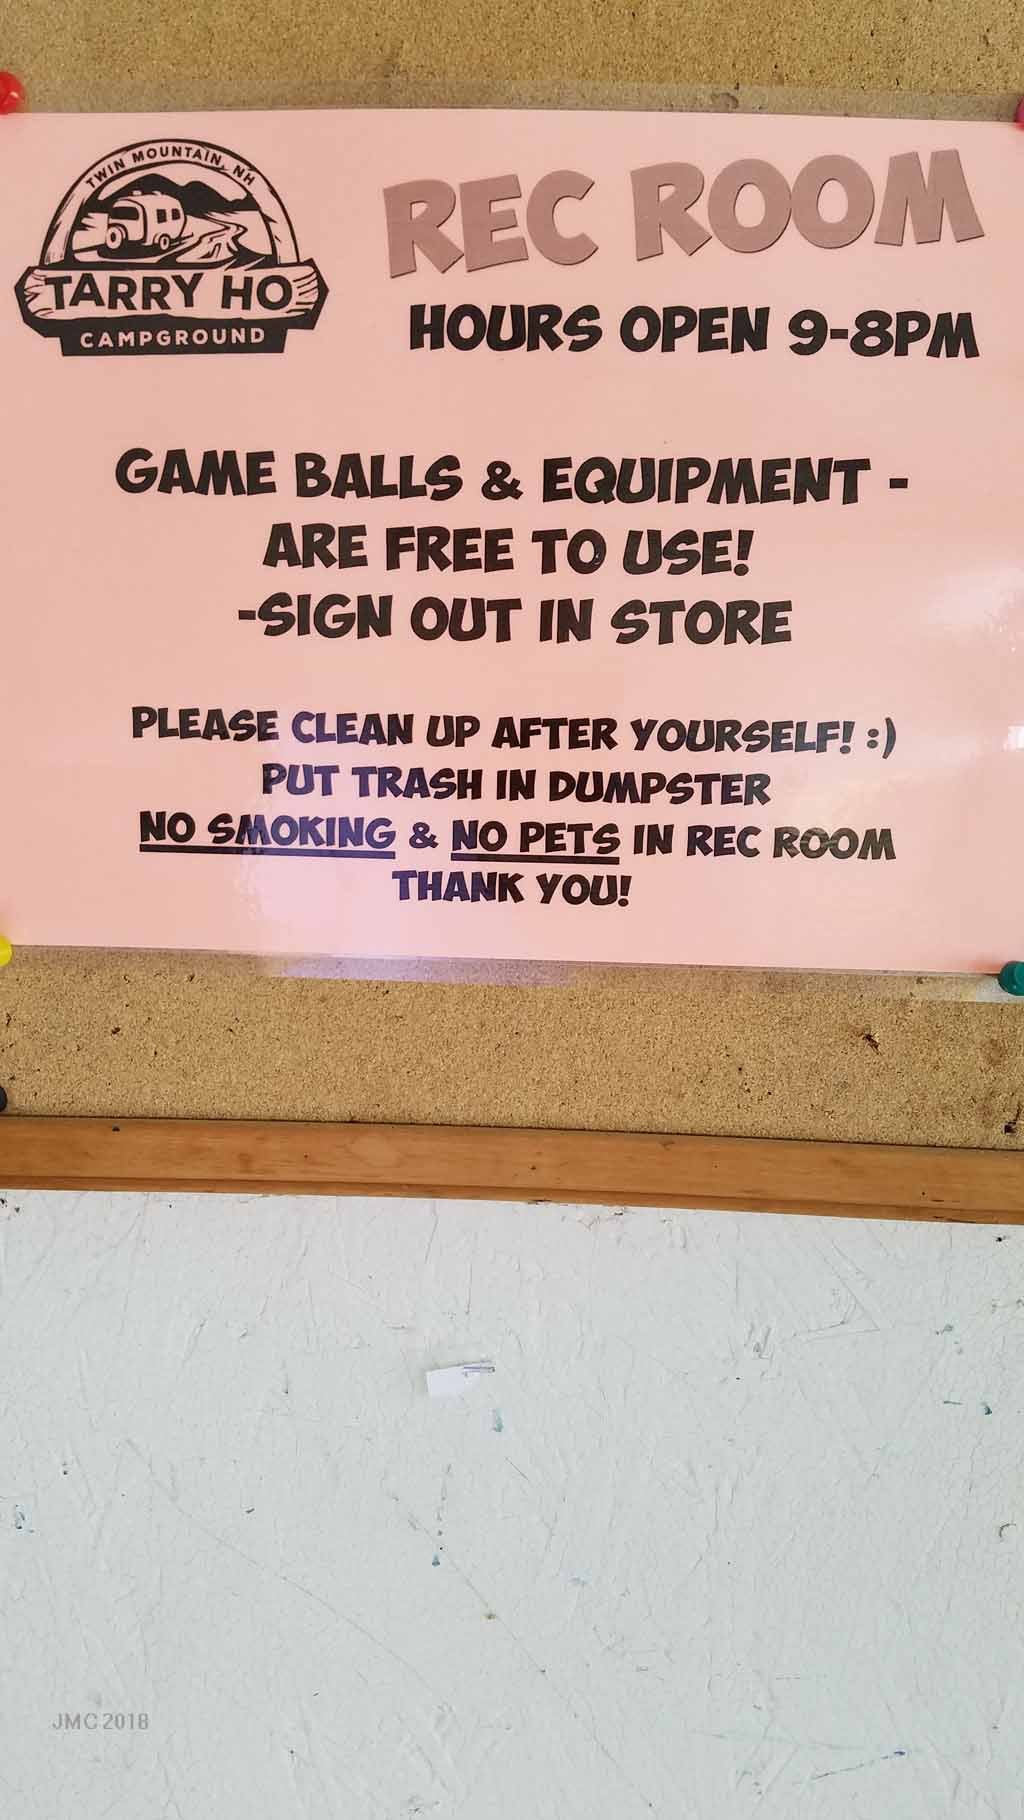 Game room hours and equipment